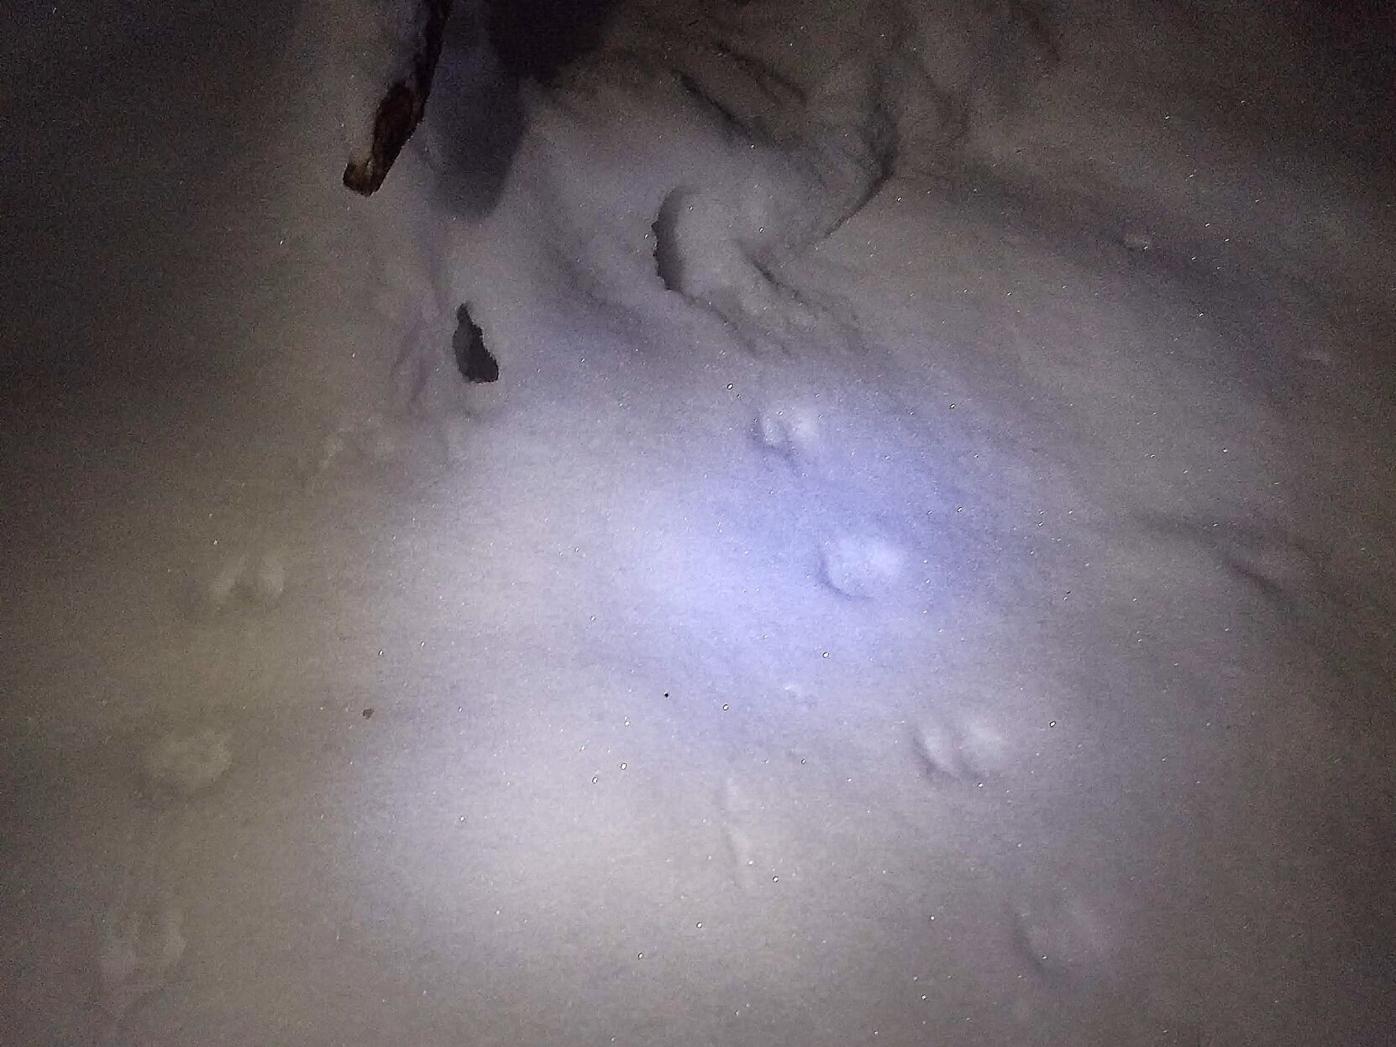 Weasel tracks disappearing into the snow